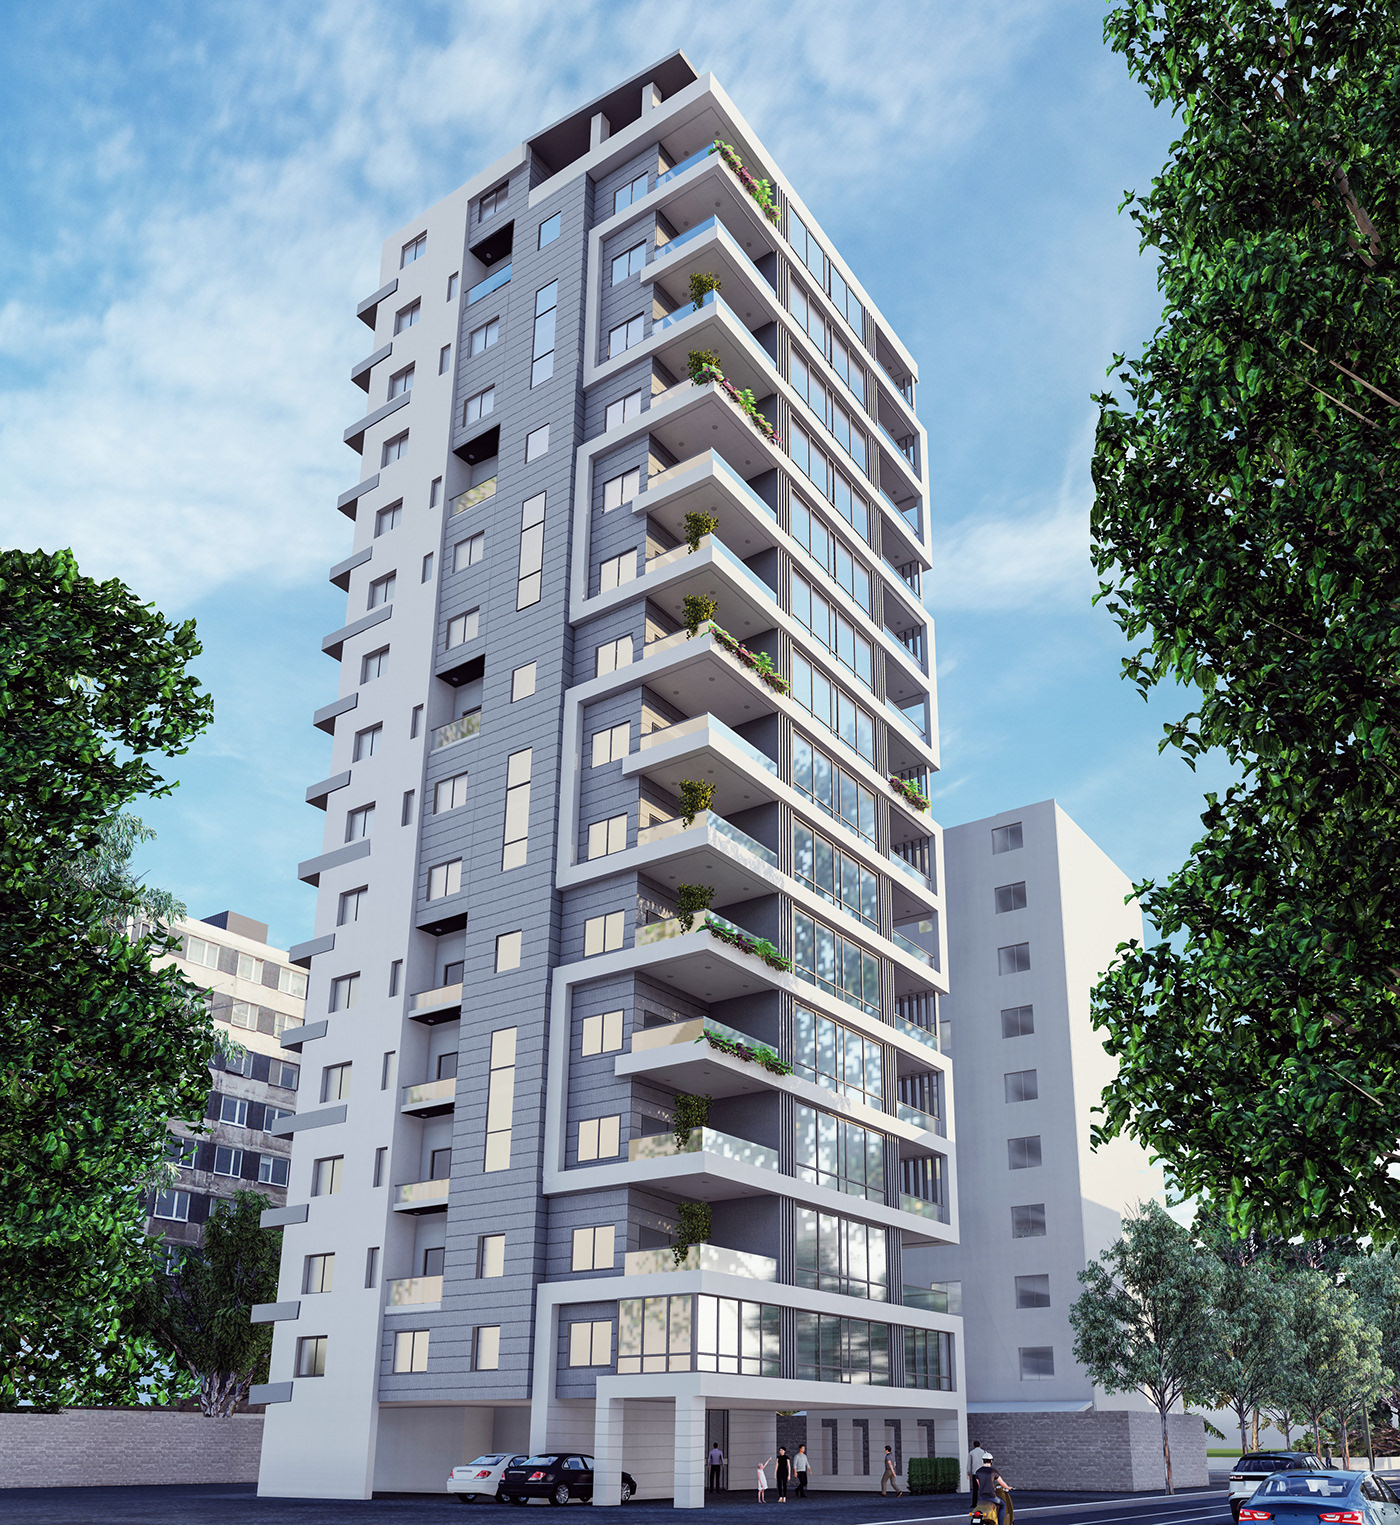 architecture Render visualization 3D exterior lumion residential building tower building